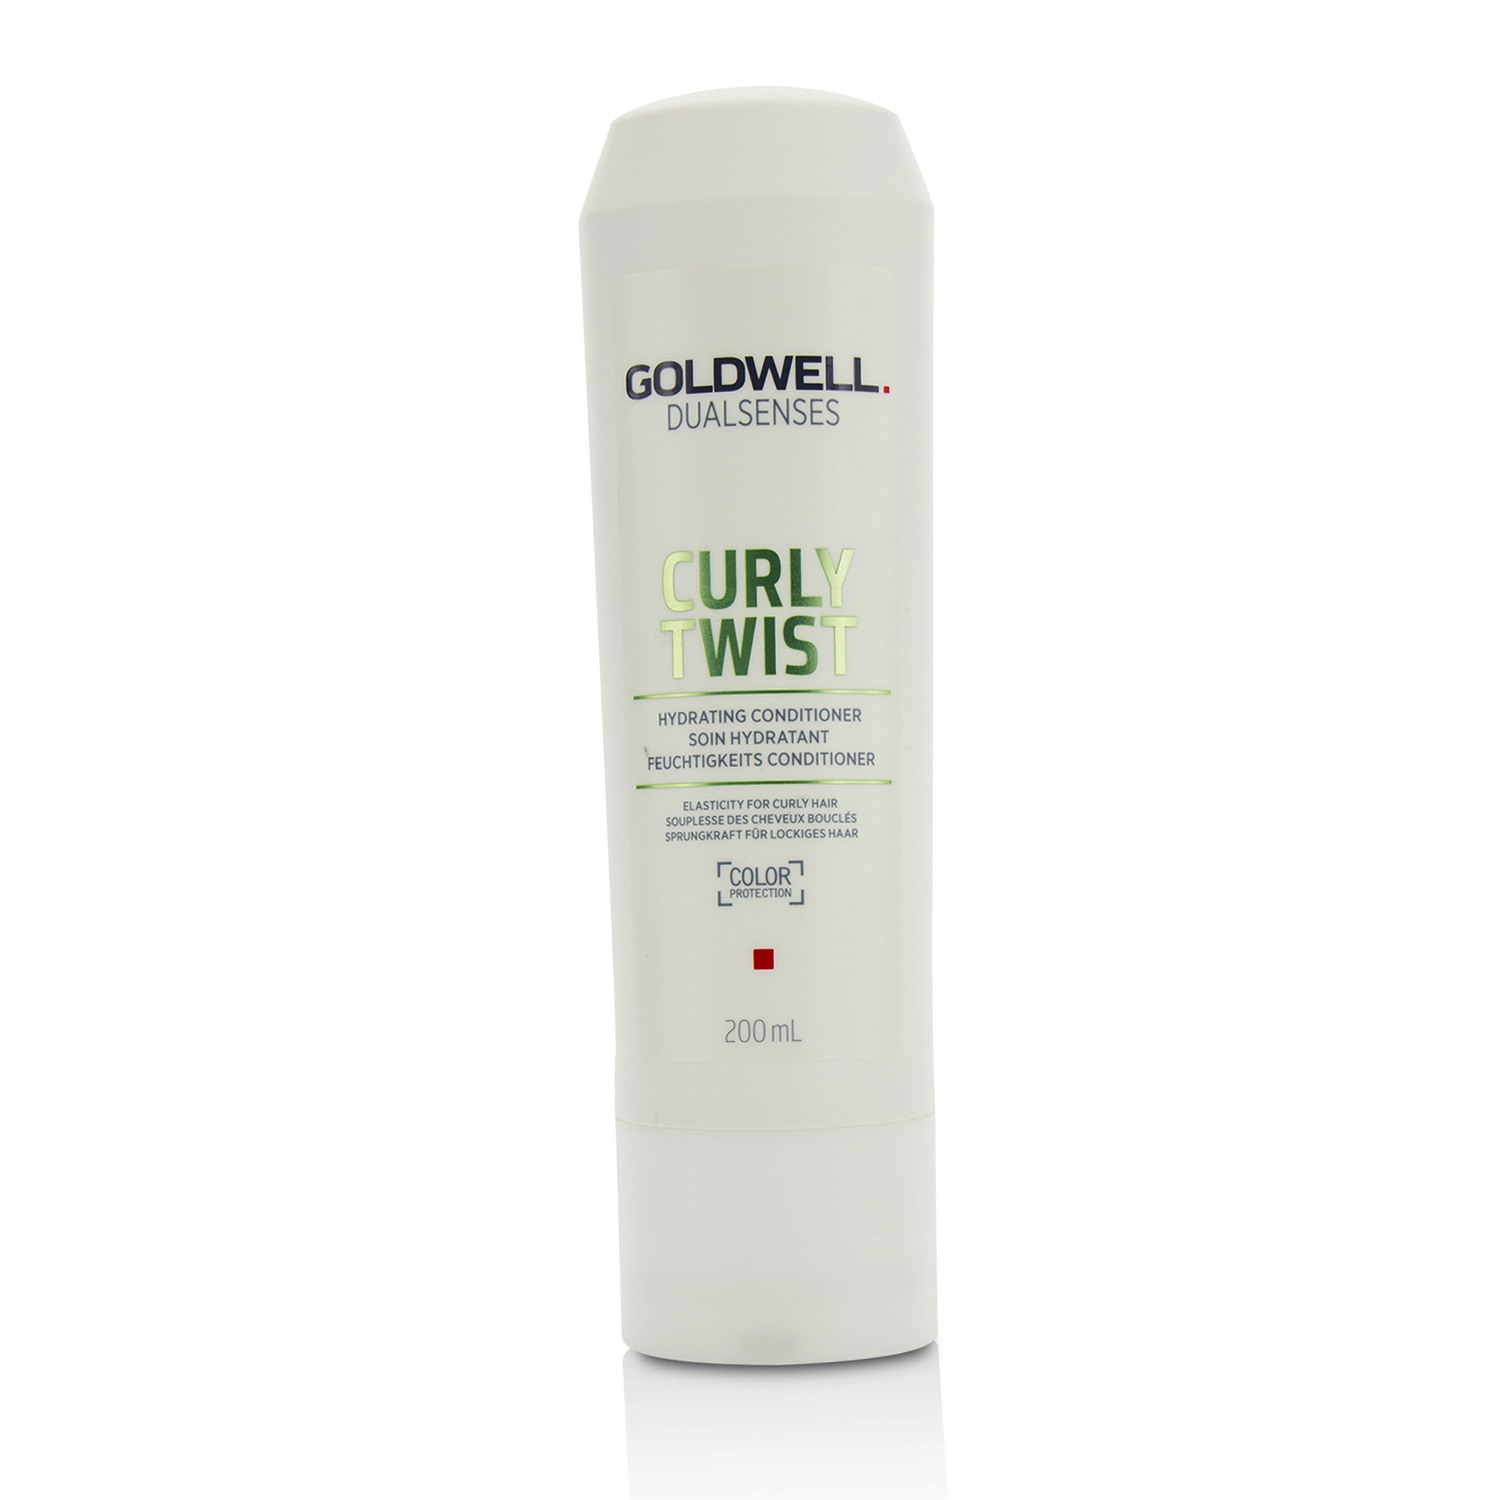 Dual Senses Curly Twist Hydrating Conditioner (Elasticity For Curly Hair) Goldwell Image